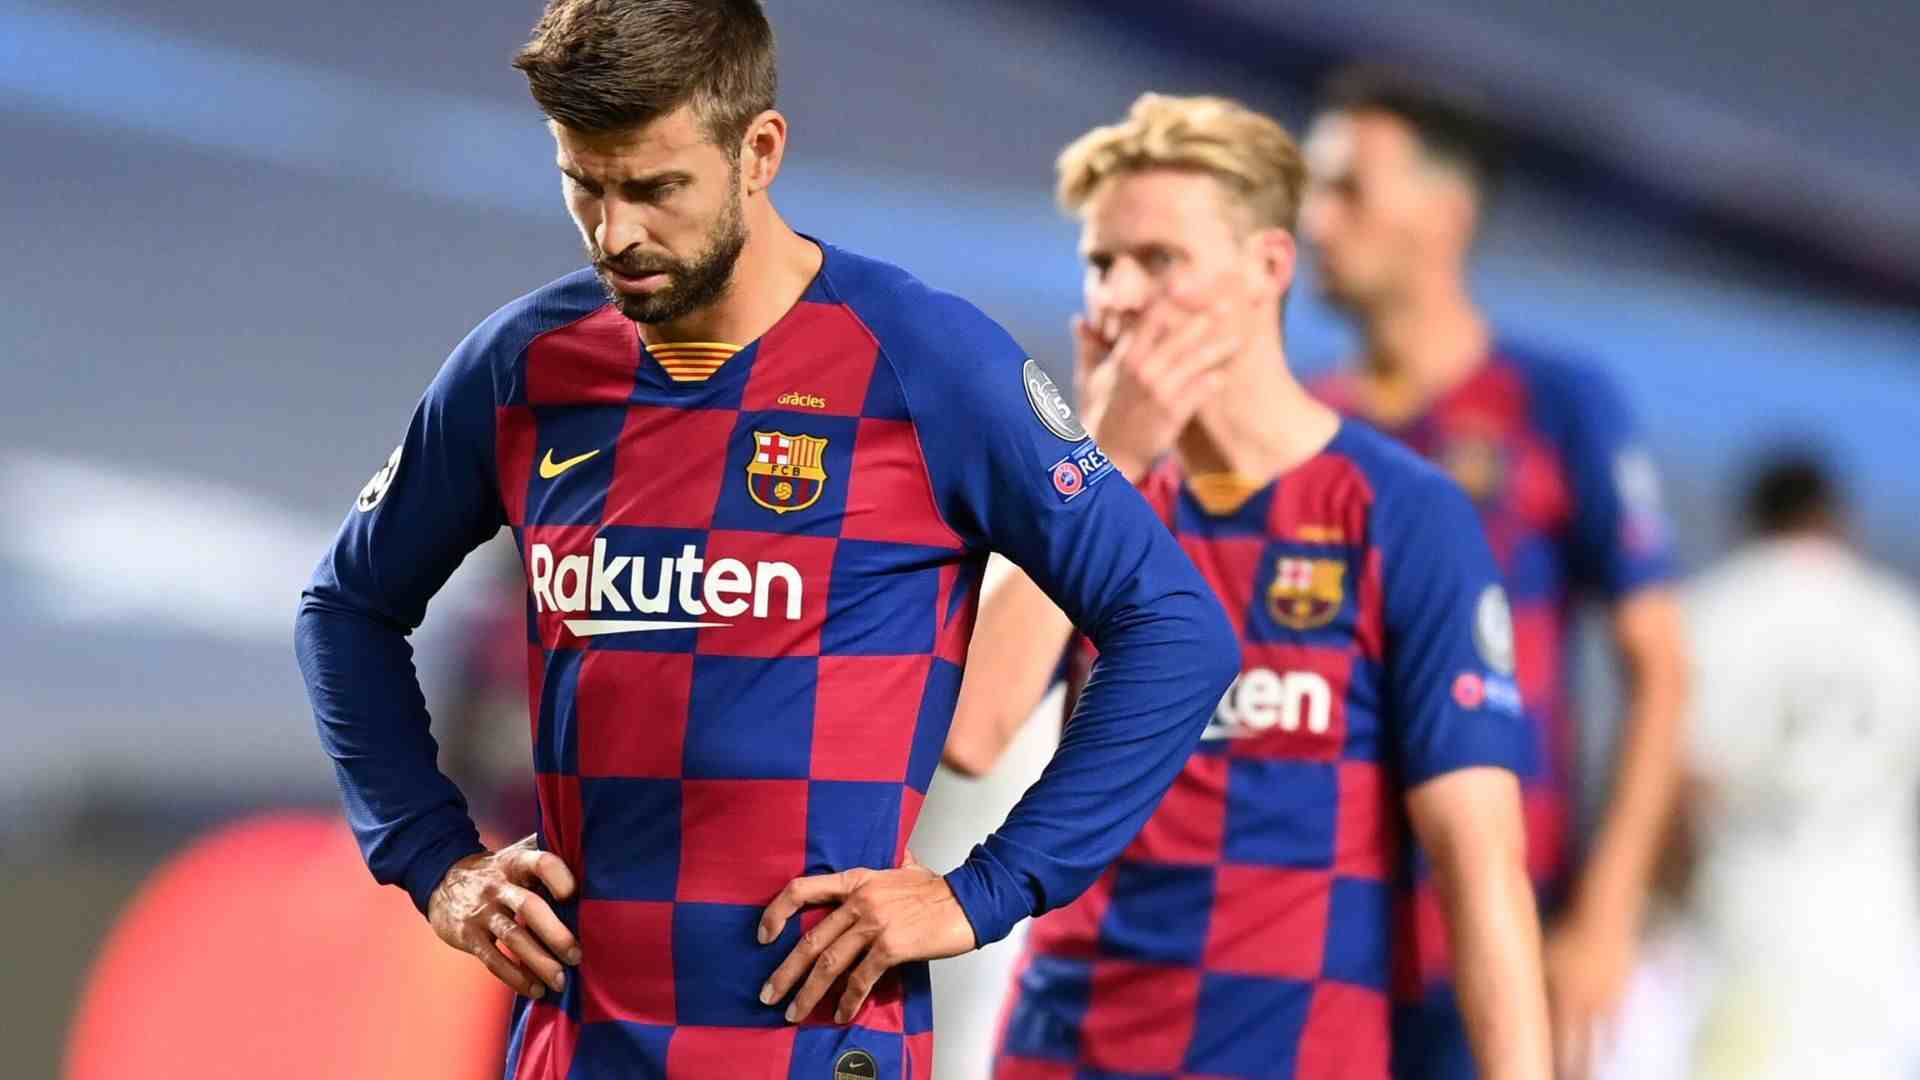 The Downfall Of FC Barcelona: A Once Great Football Club, Now In Ruins